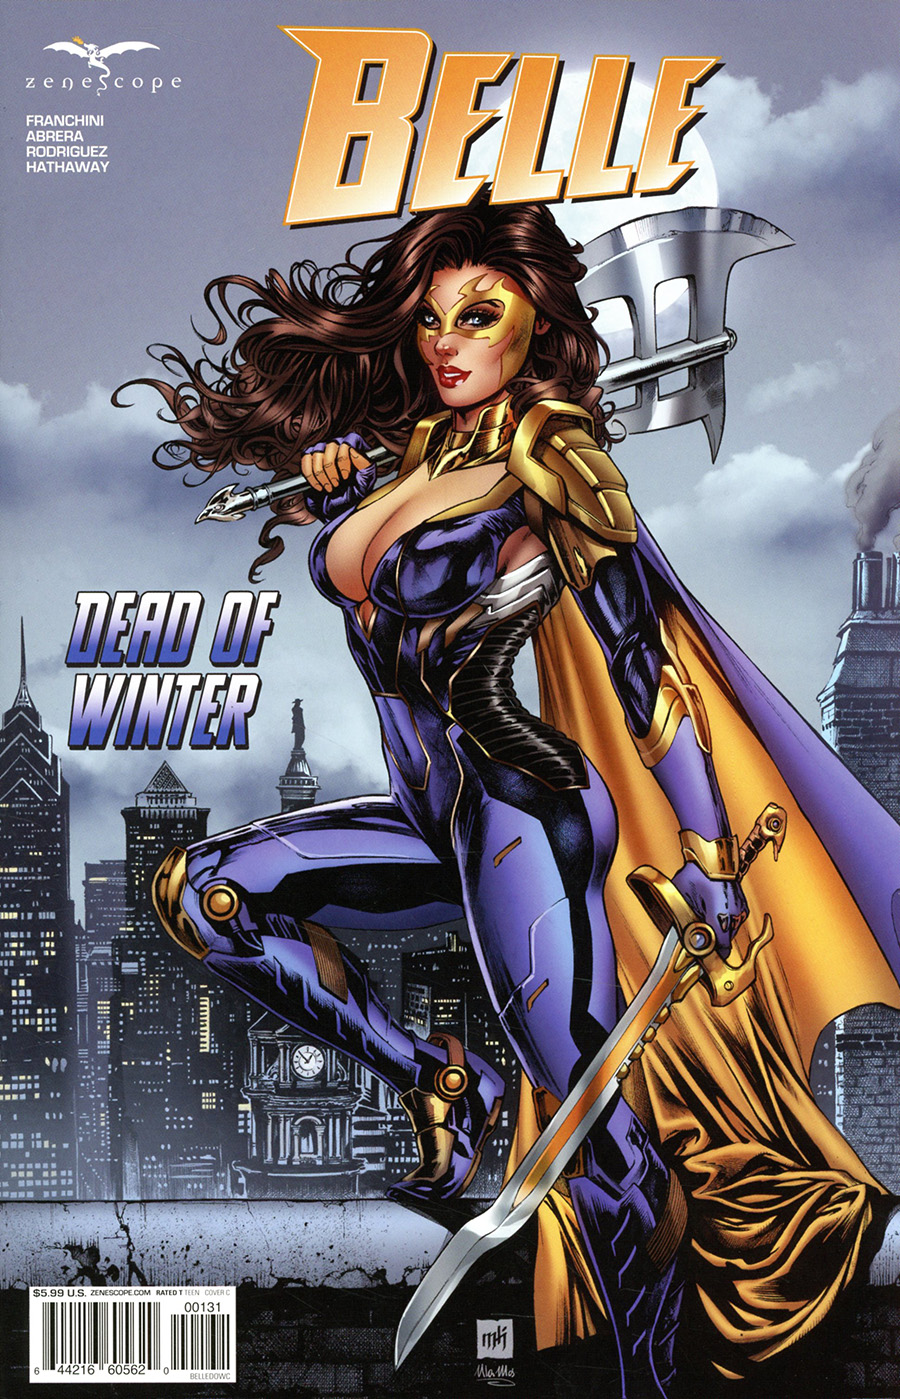 Grimm Fairy Tales Presents Belle Dead Of Winter One Shot Cover C Mike Krome